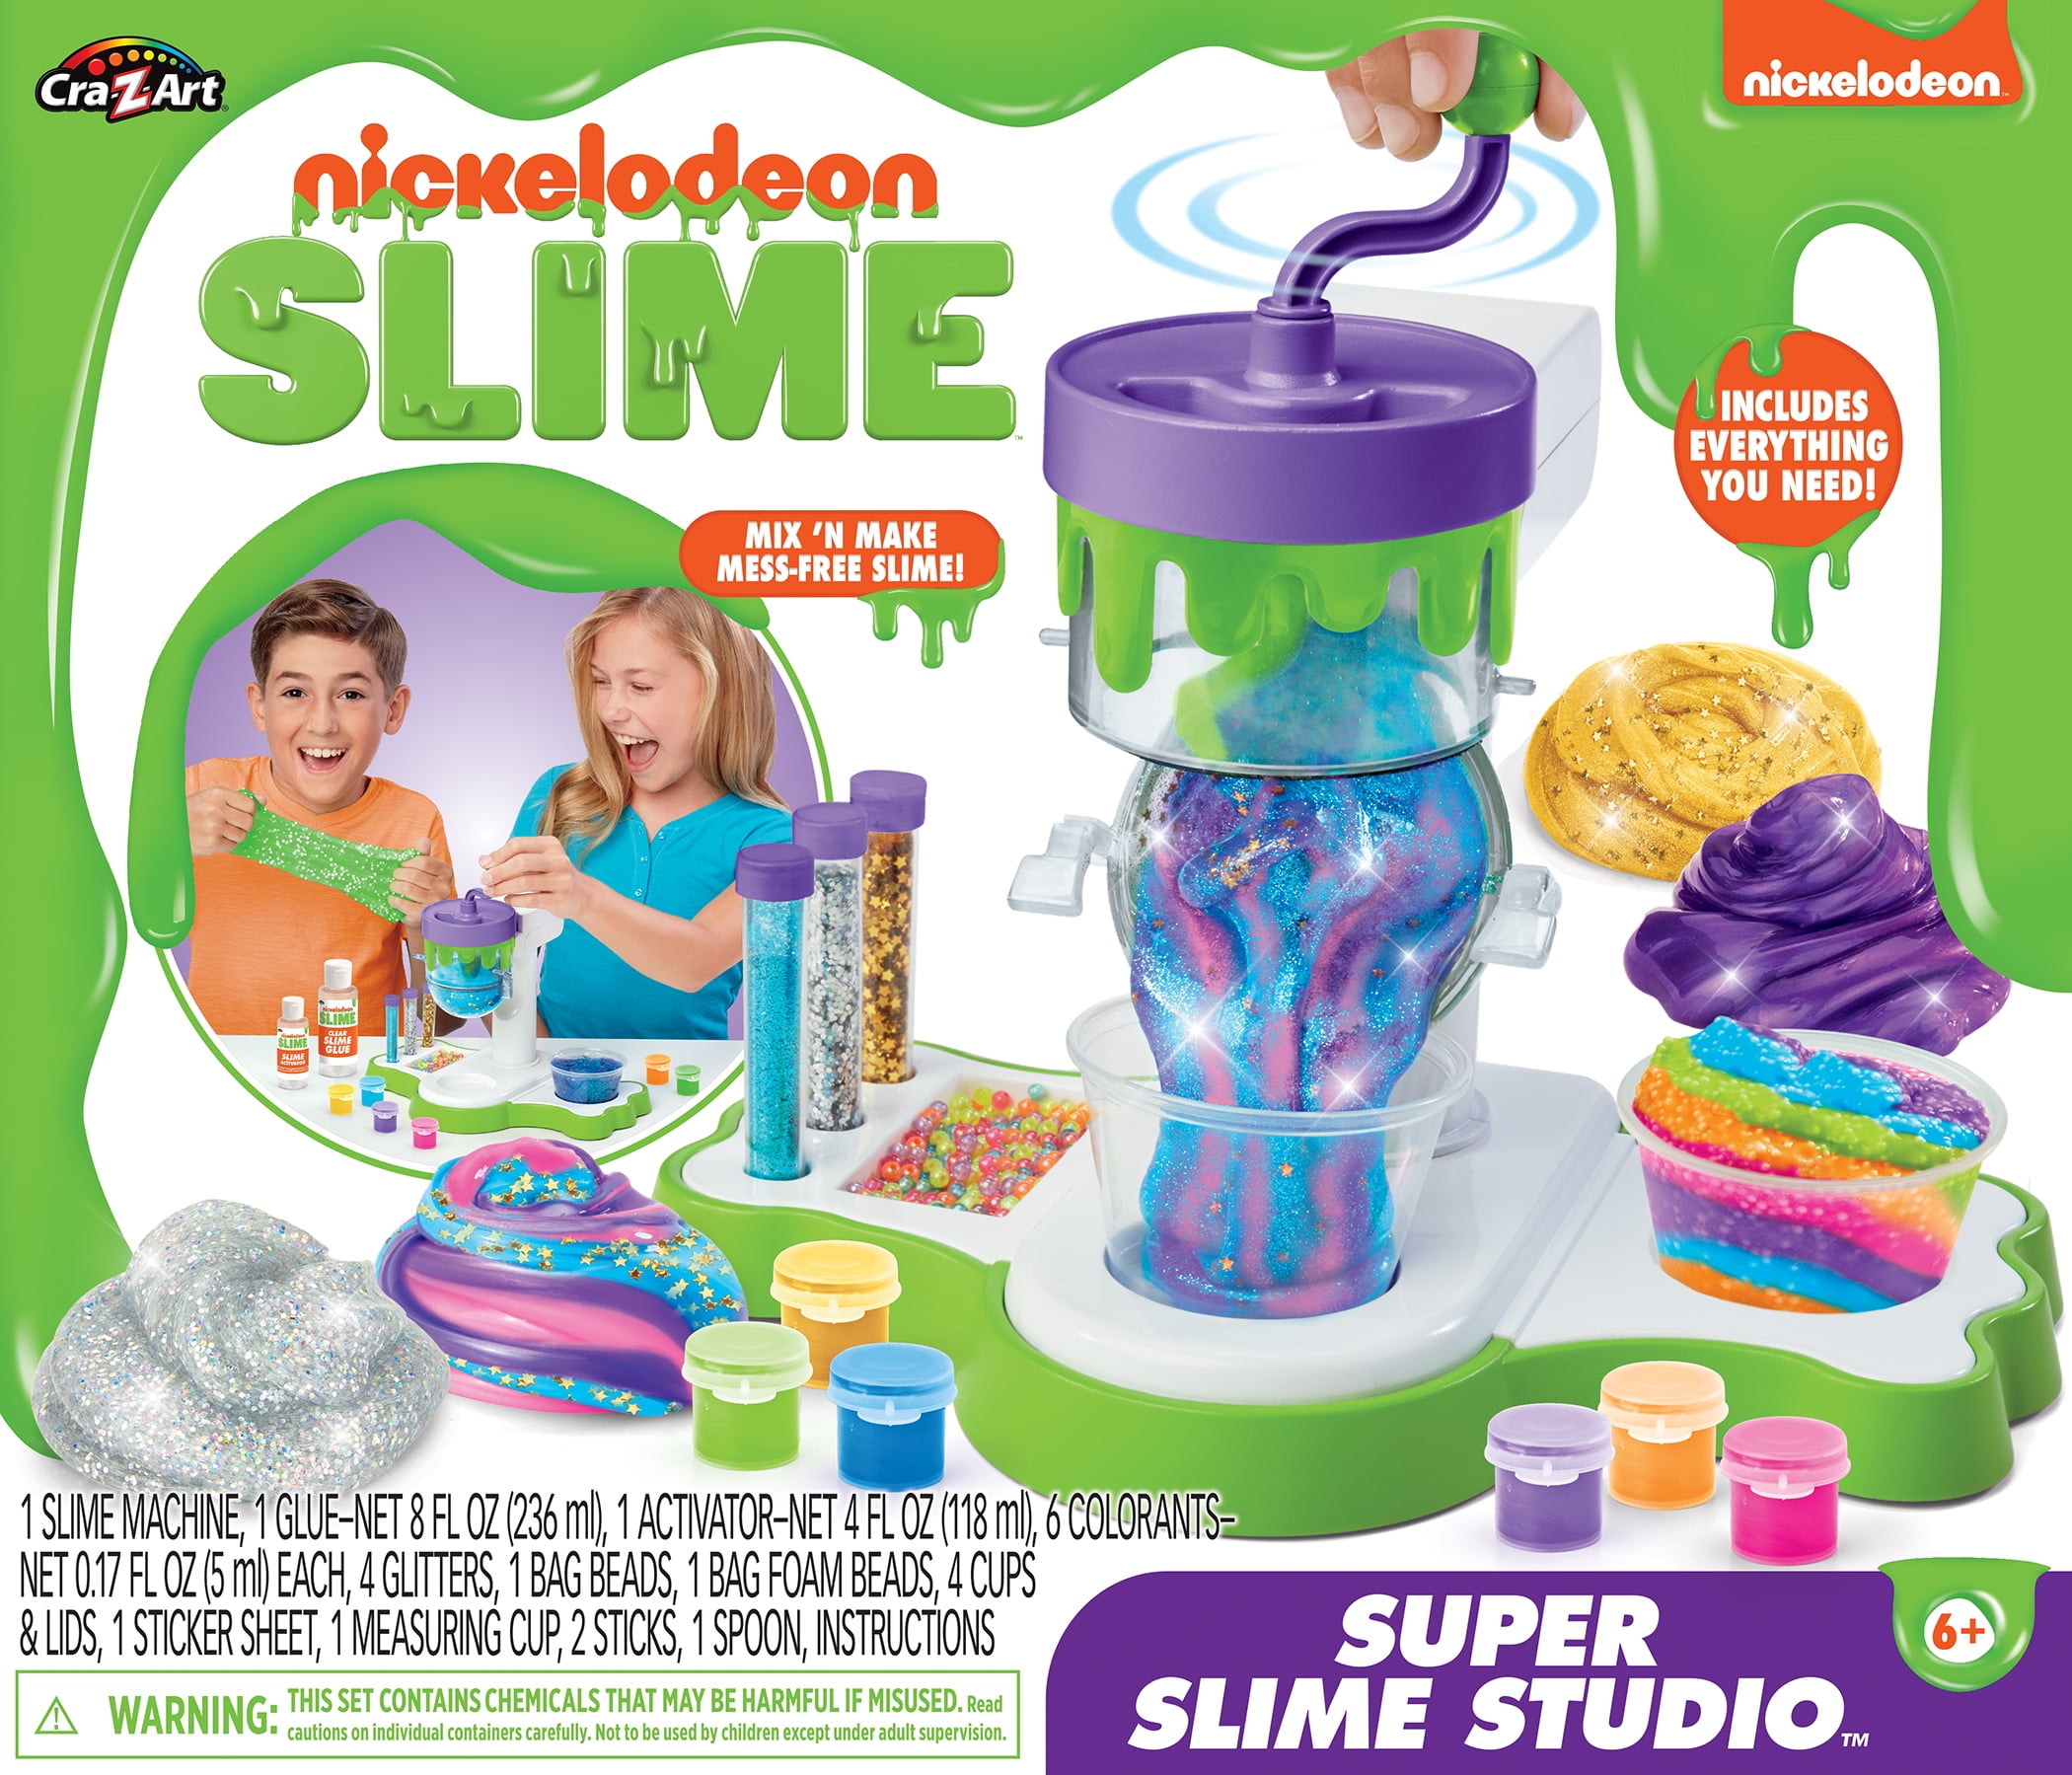 NICKELODEON SWEET SLIME CREATIONS - The Toy Insider